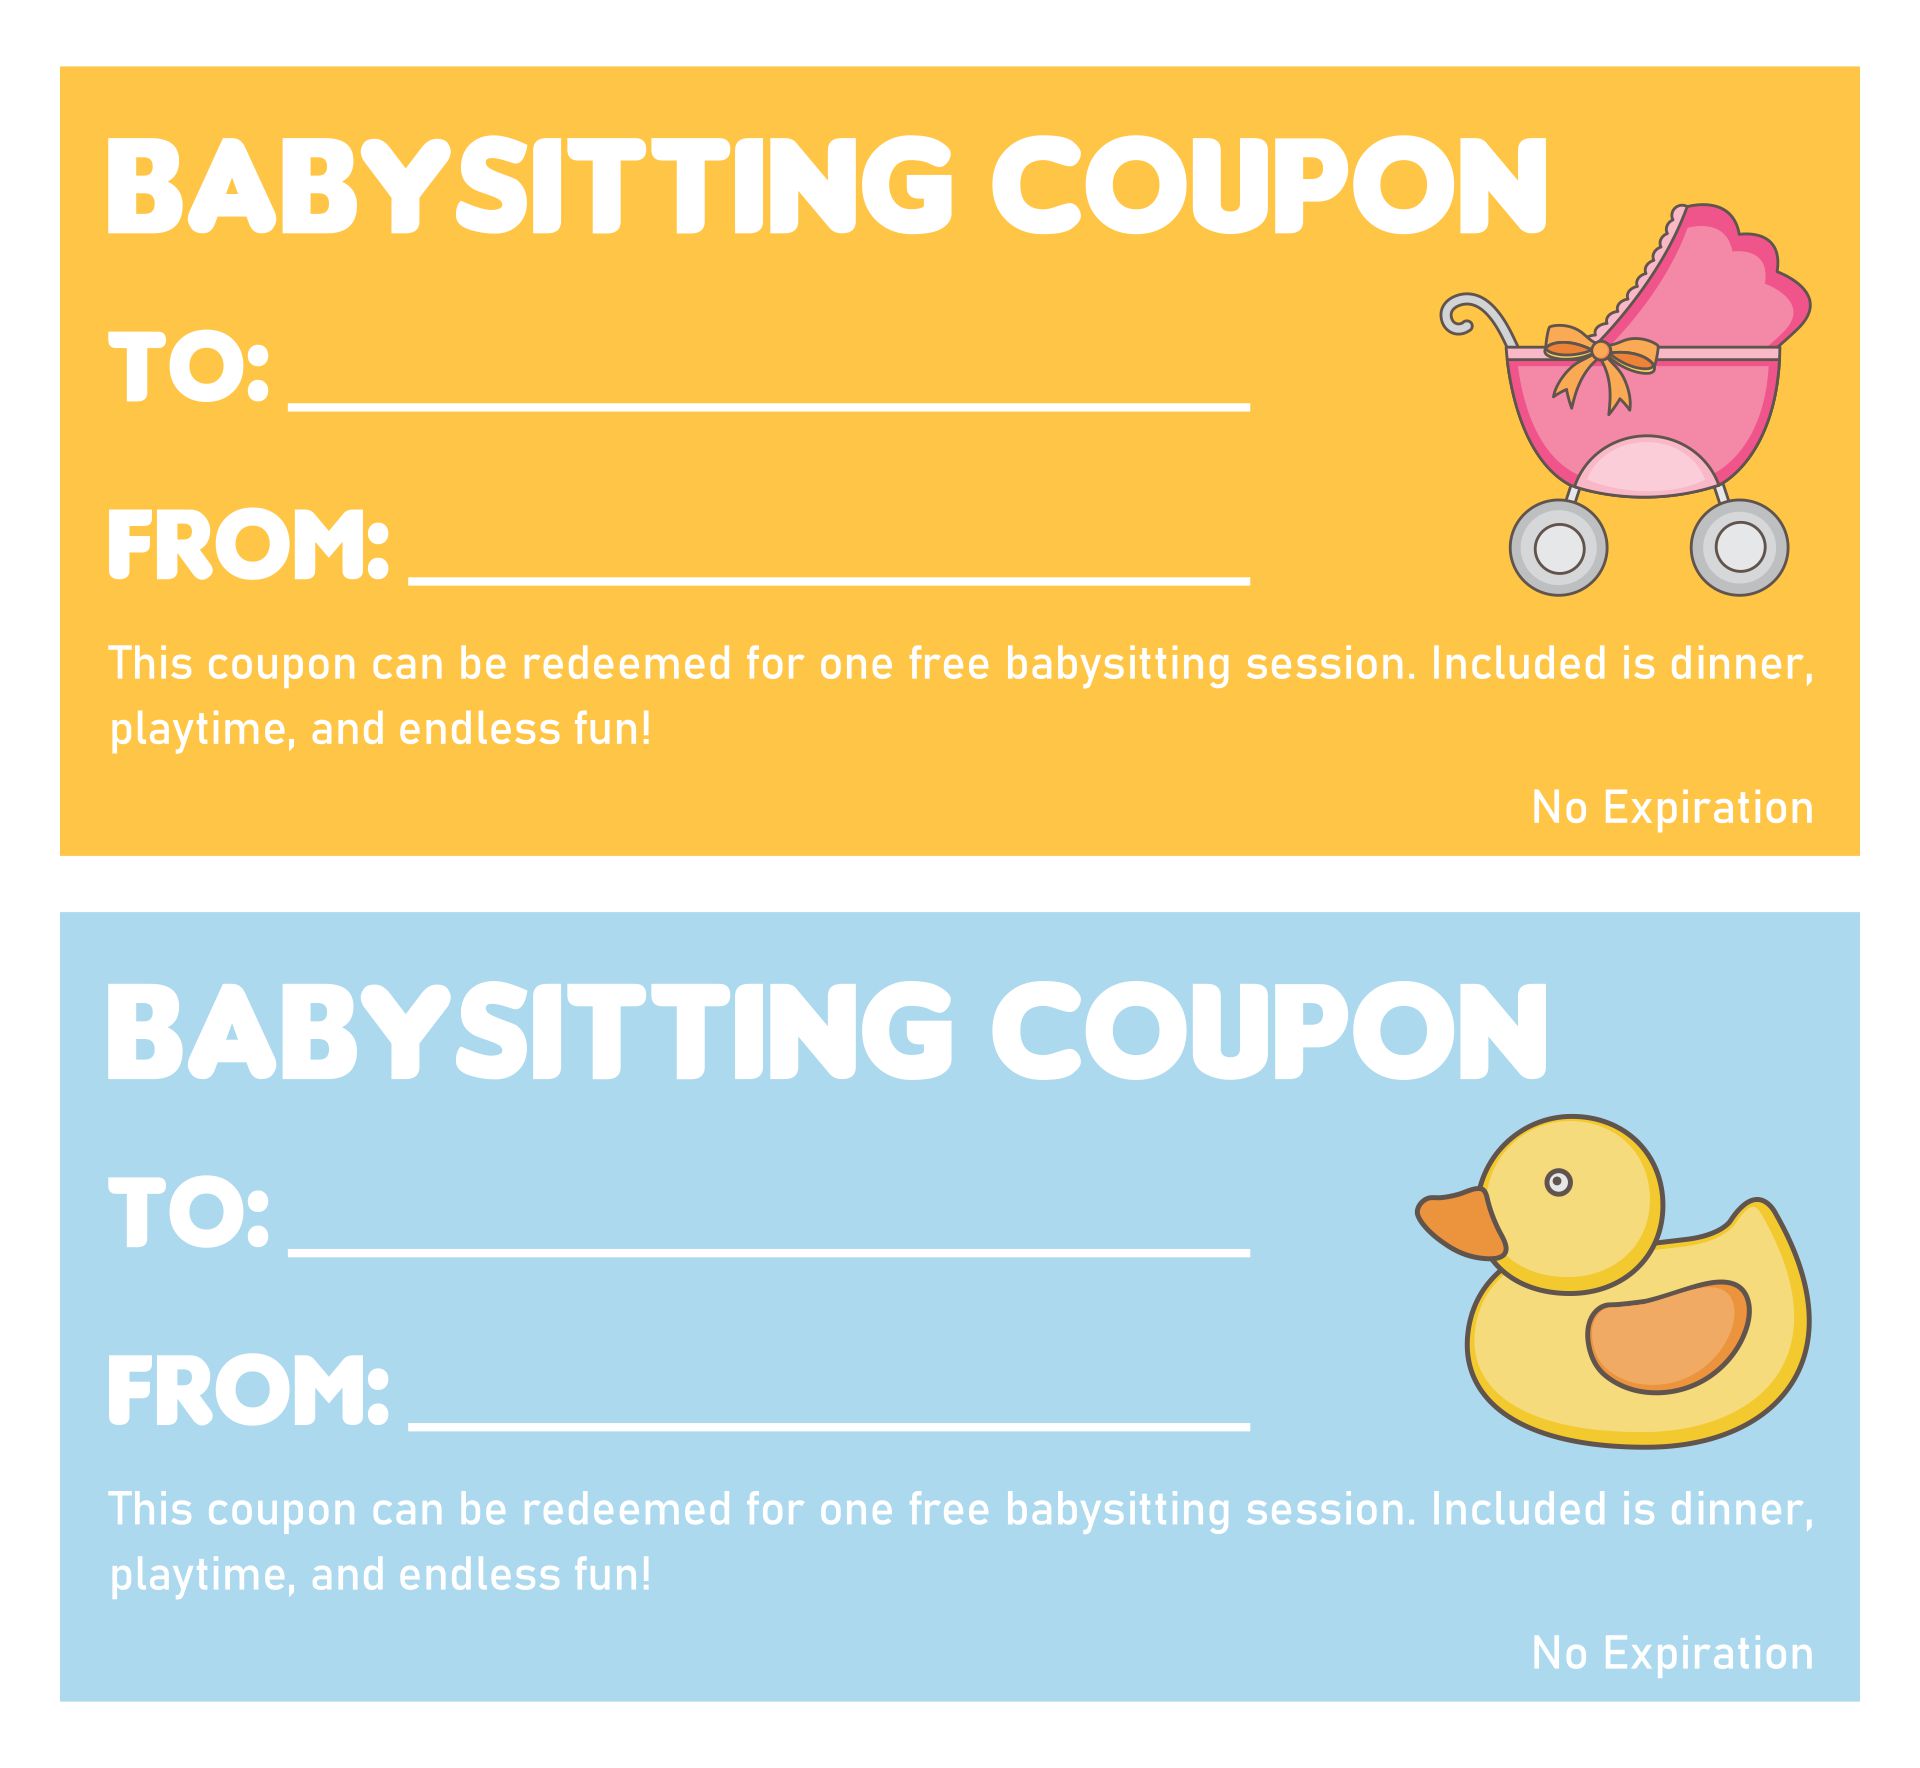 8 Best Images of Printable Babysitting Voucher Template Free